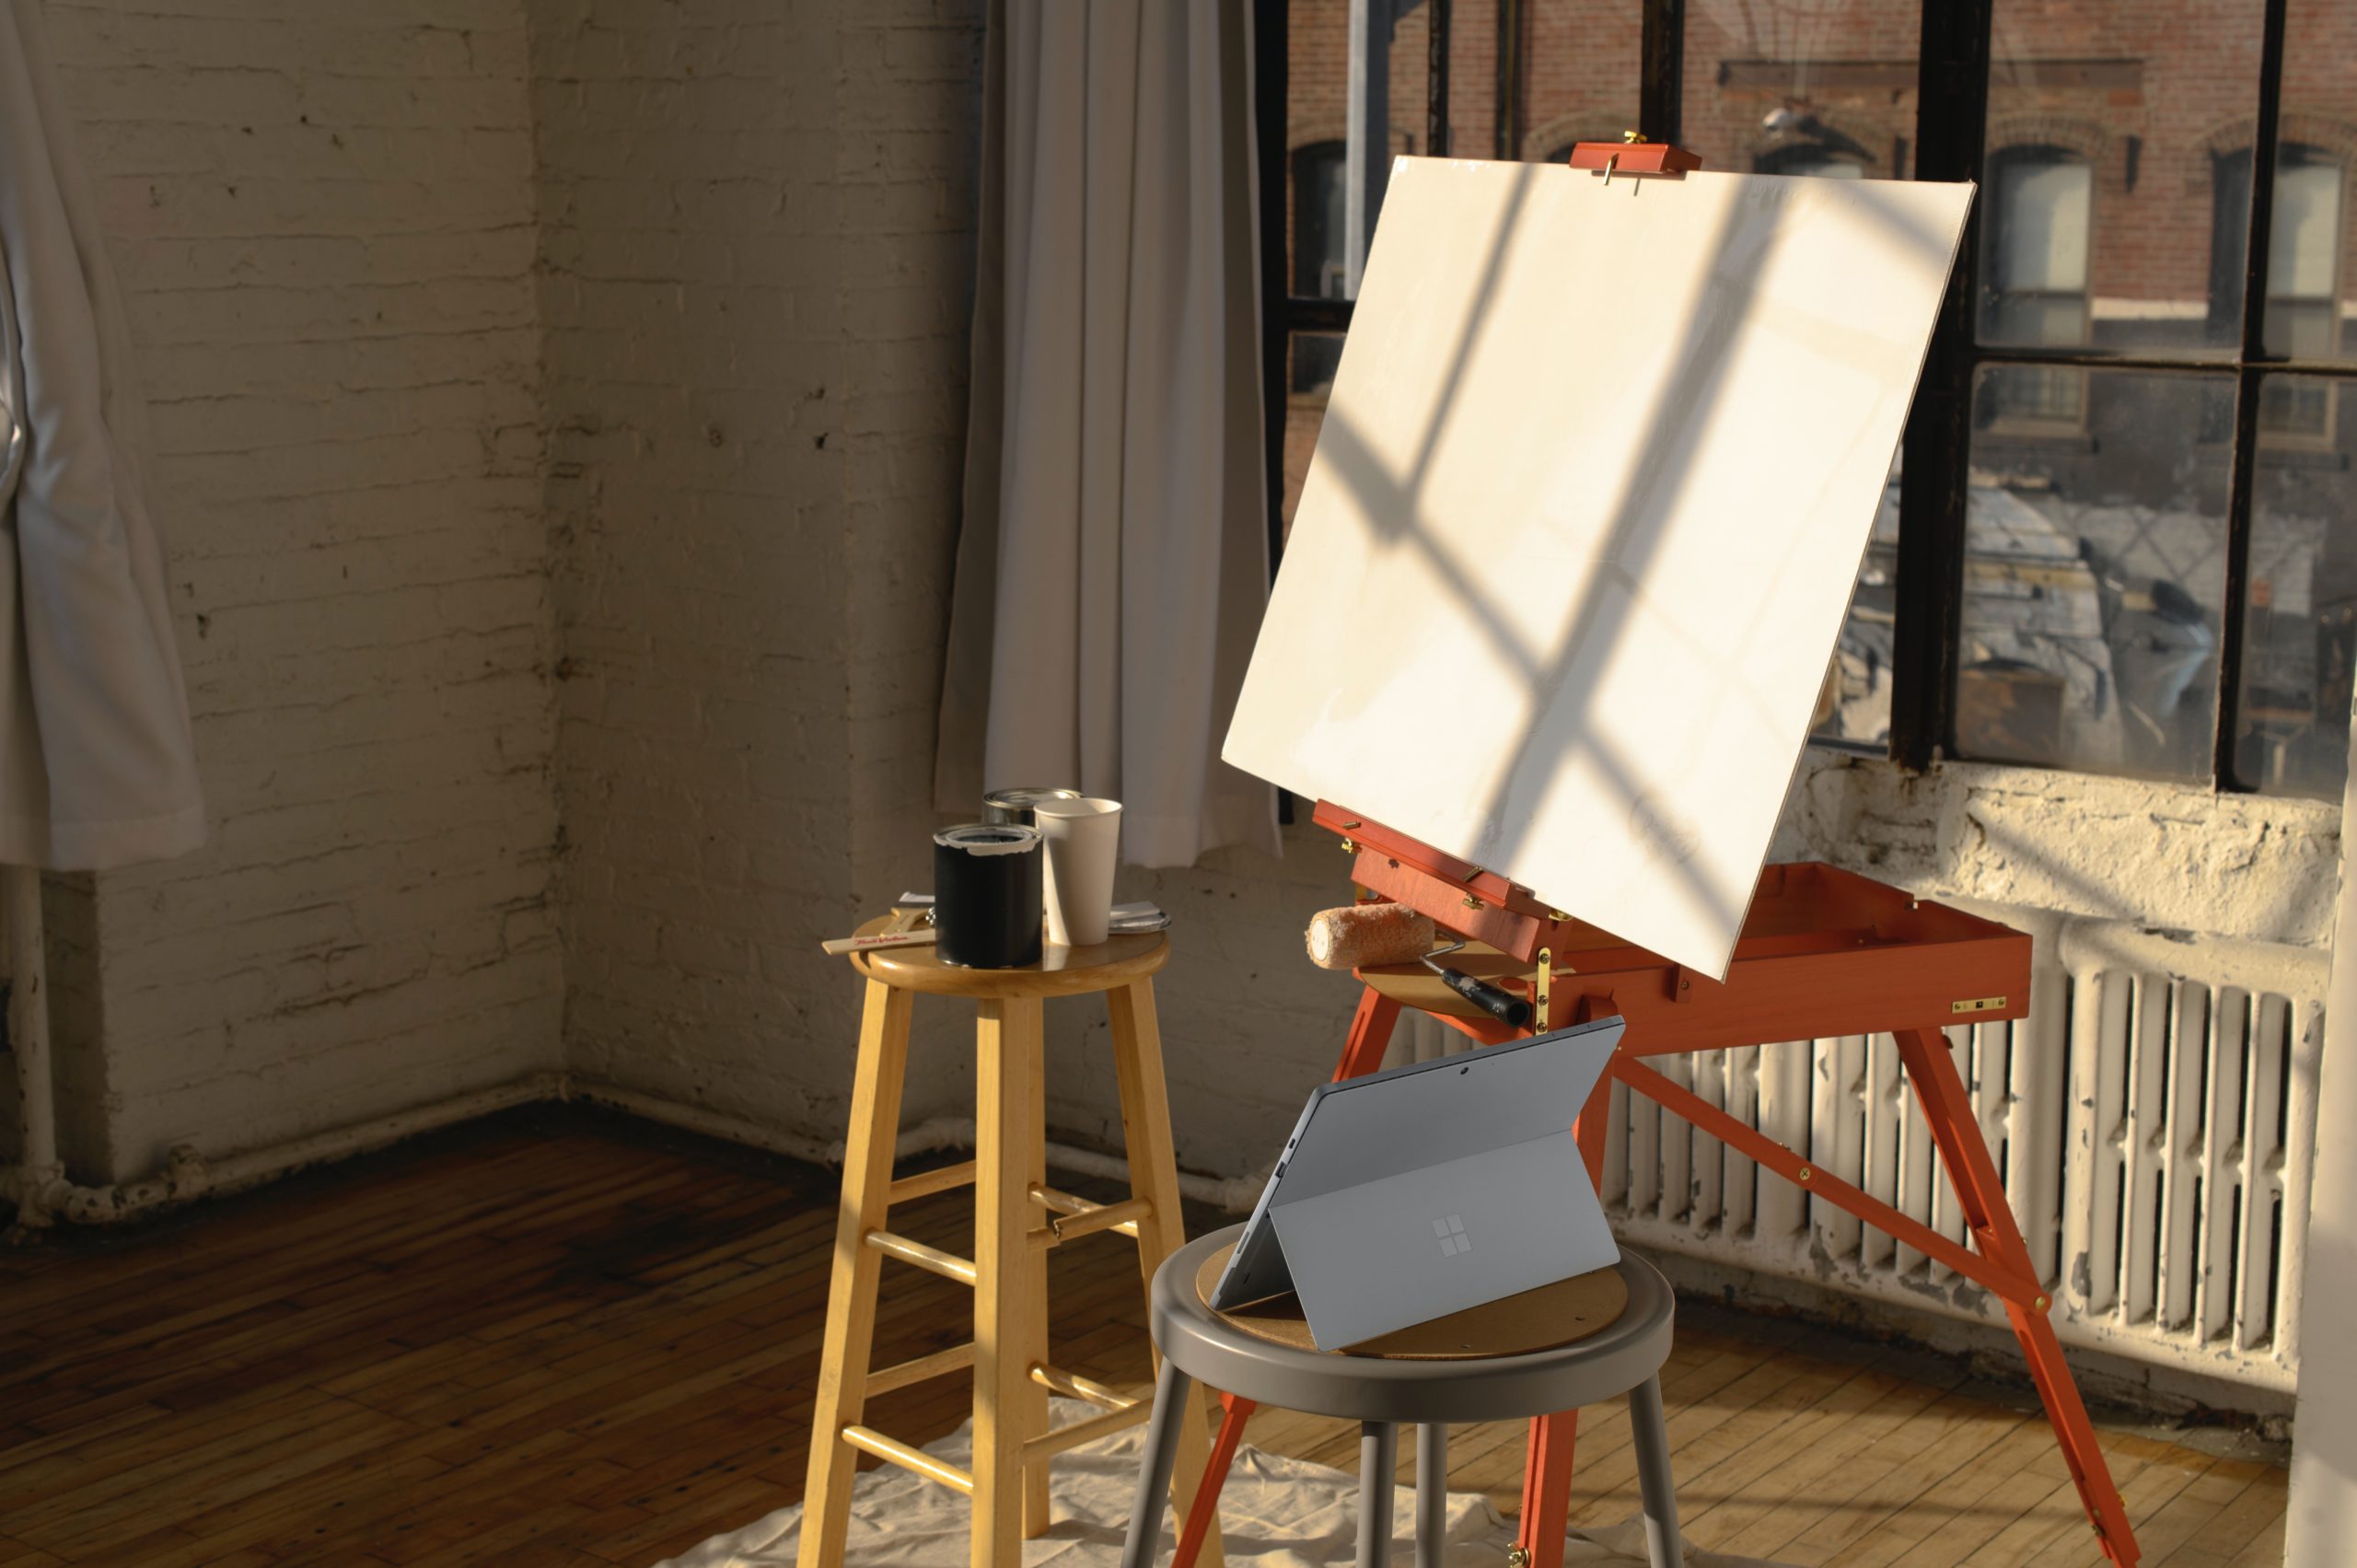 A laptop on a chair and a blank piece of paper on an easel